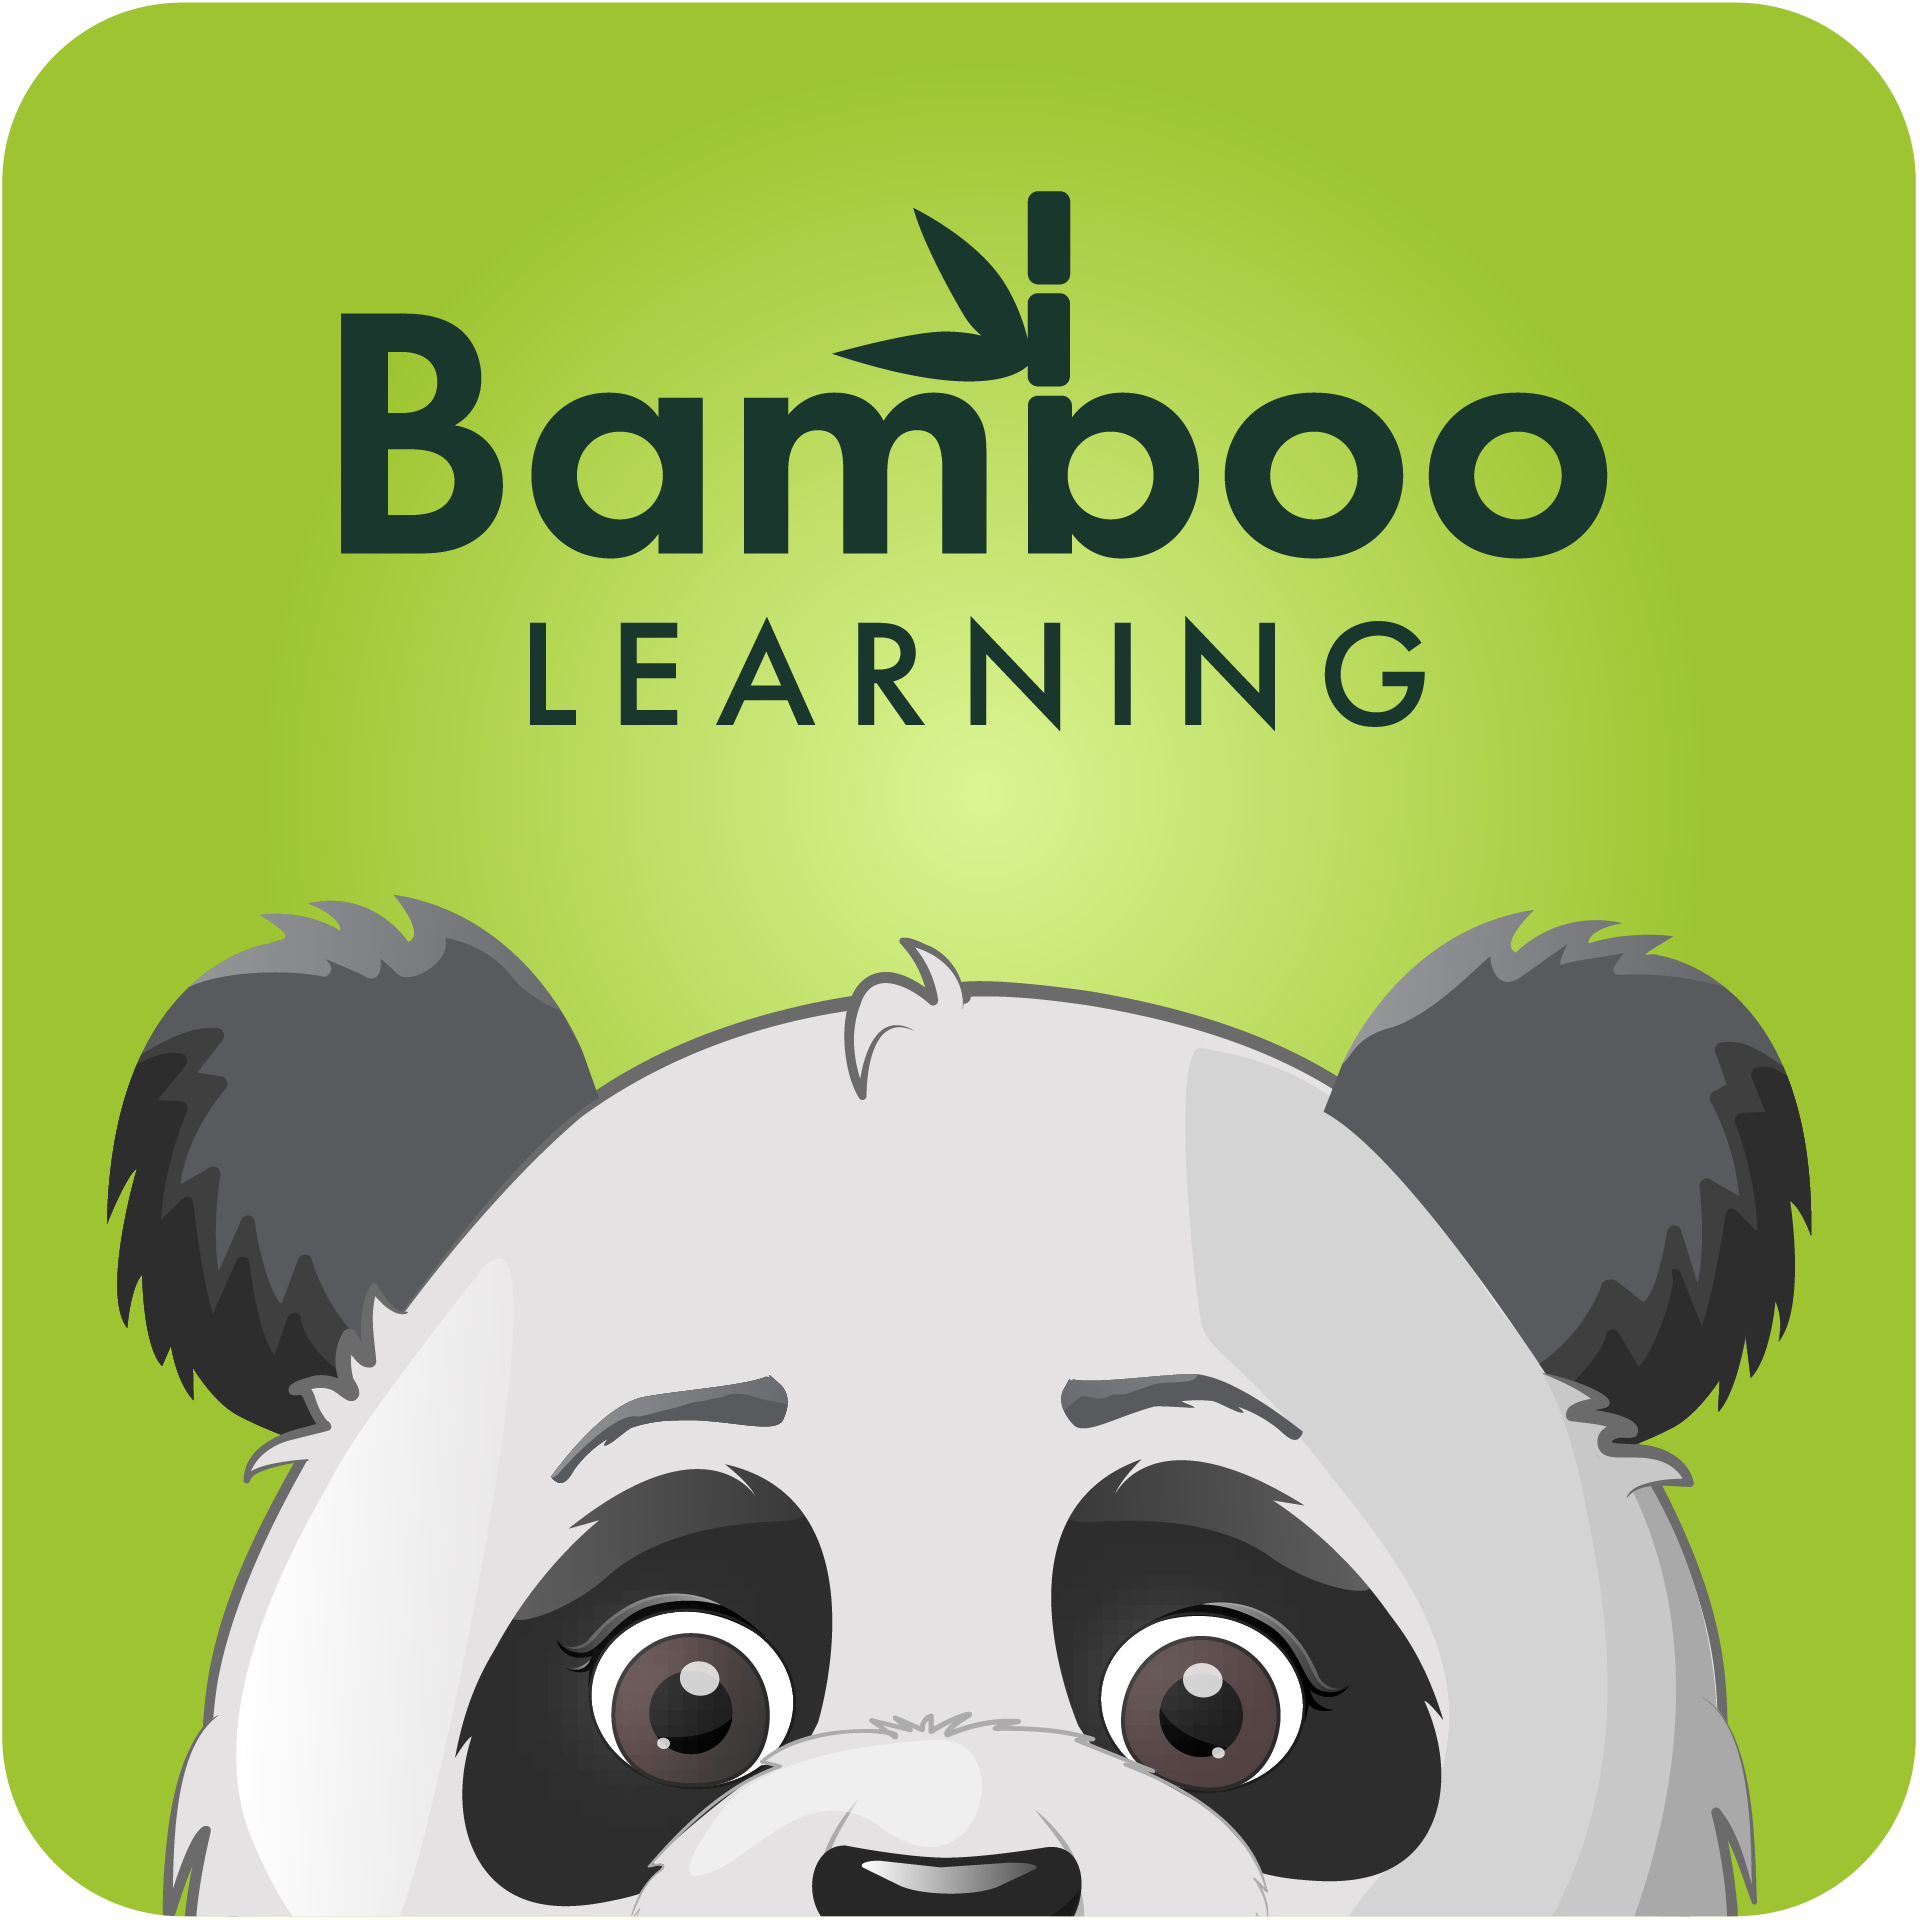 16 Great Kids Alexa Skills, Podcasts & more — Bamboo Learning